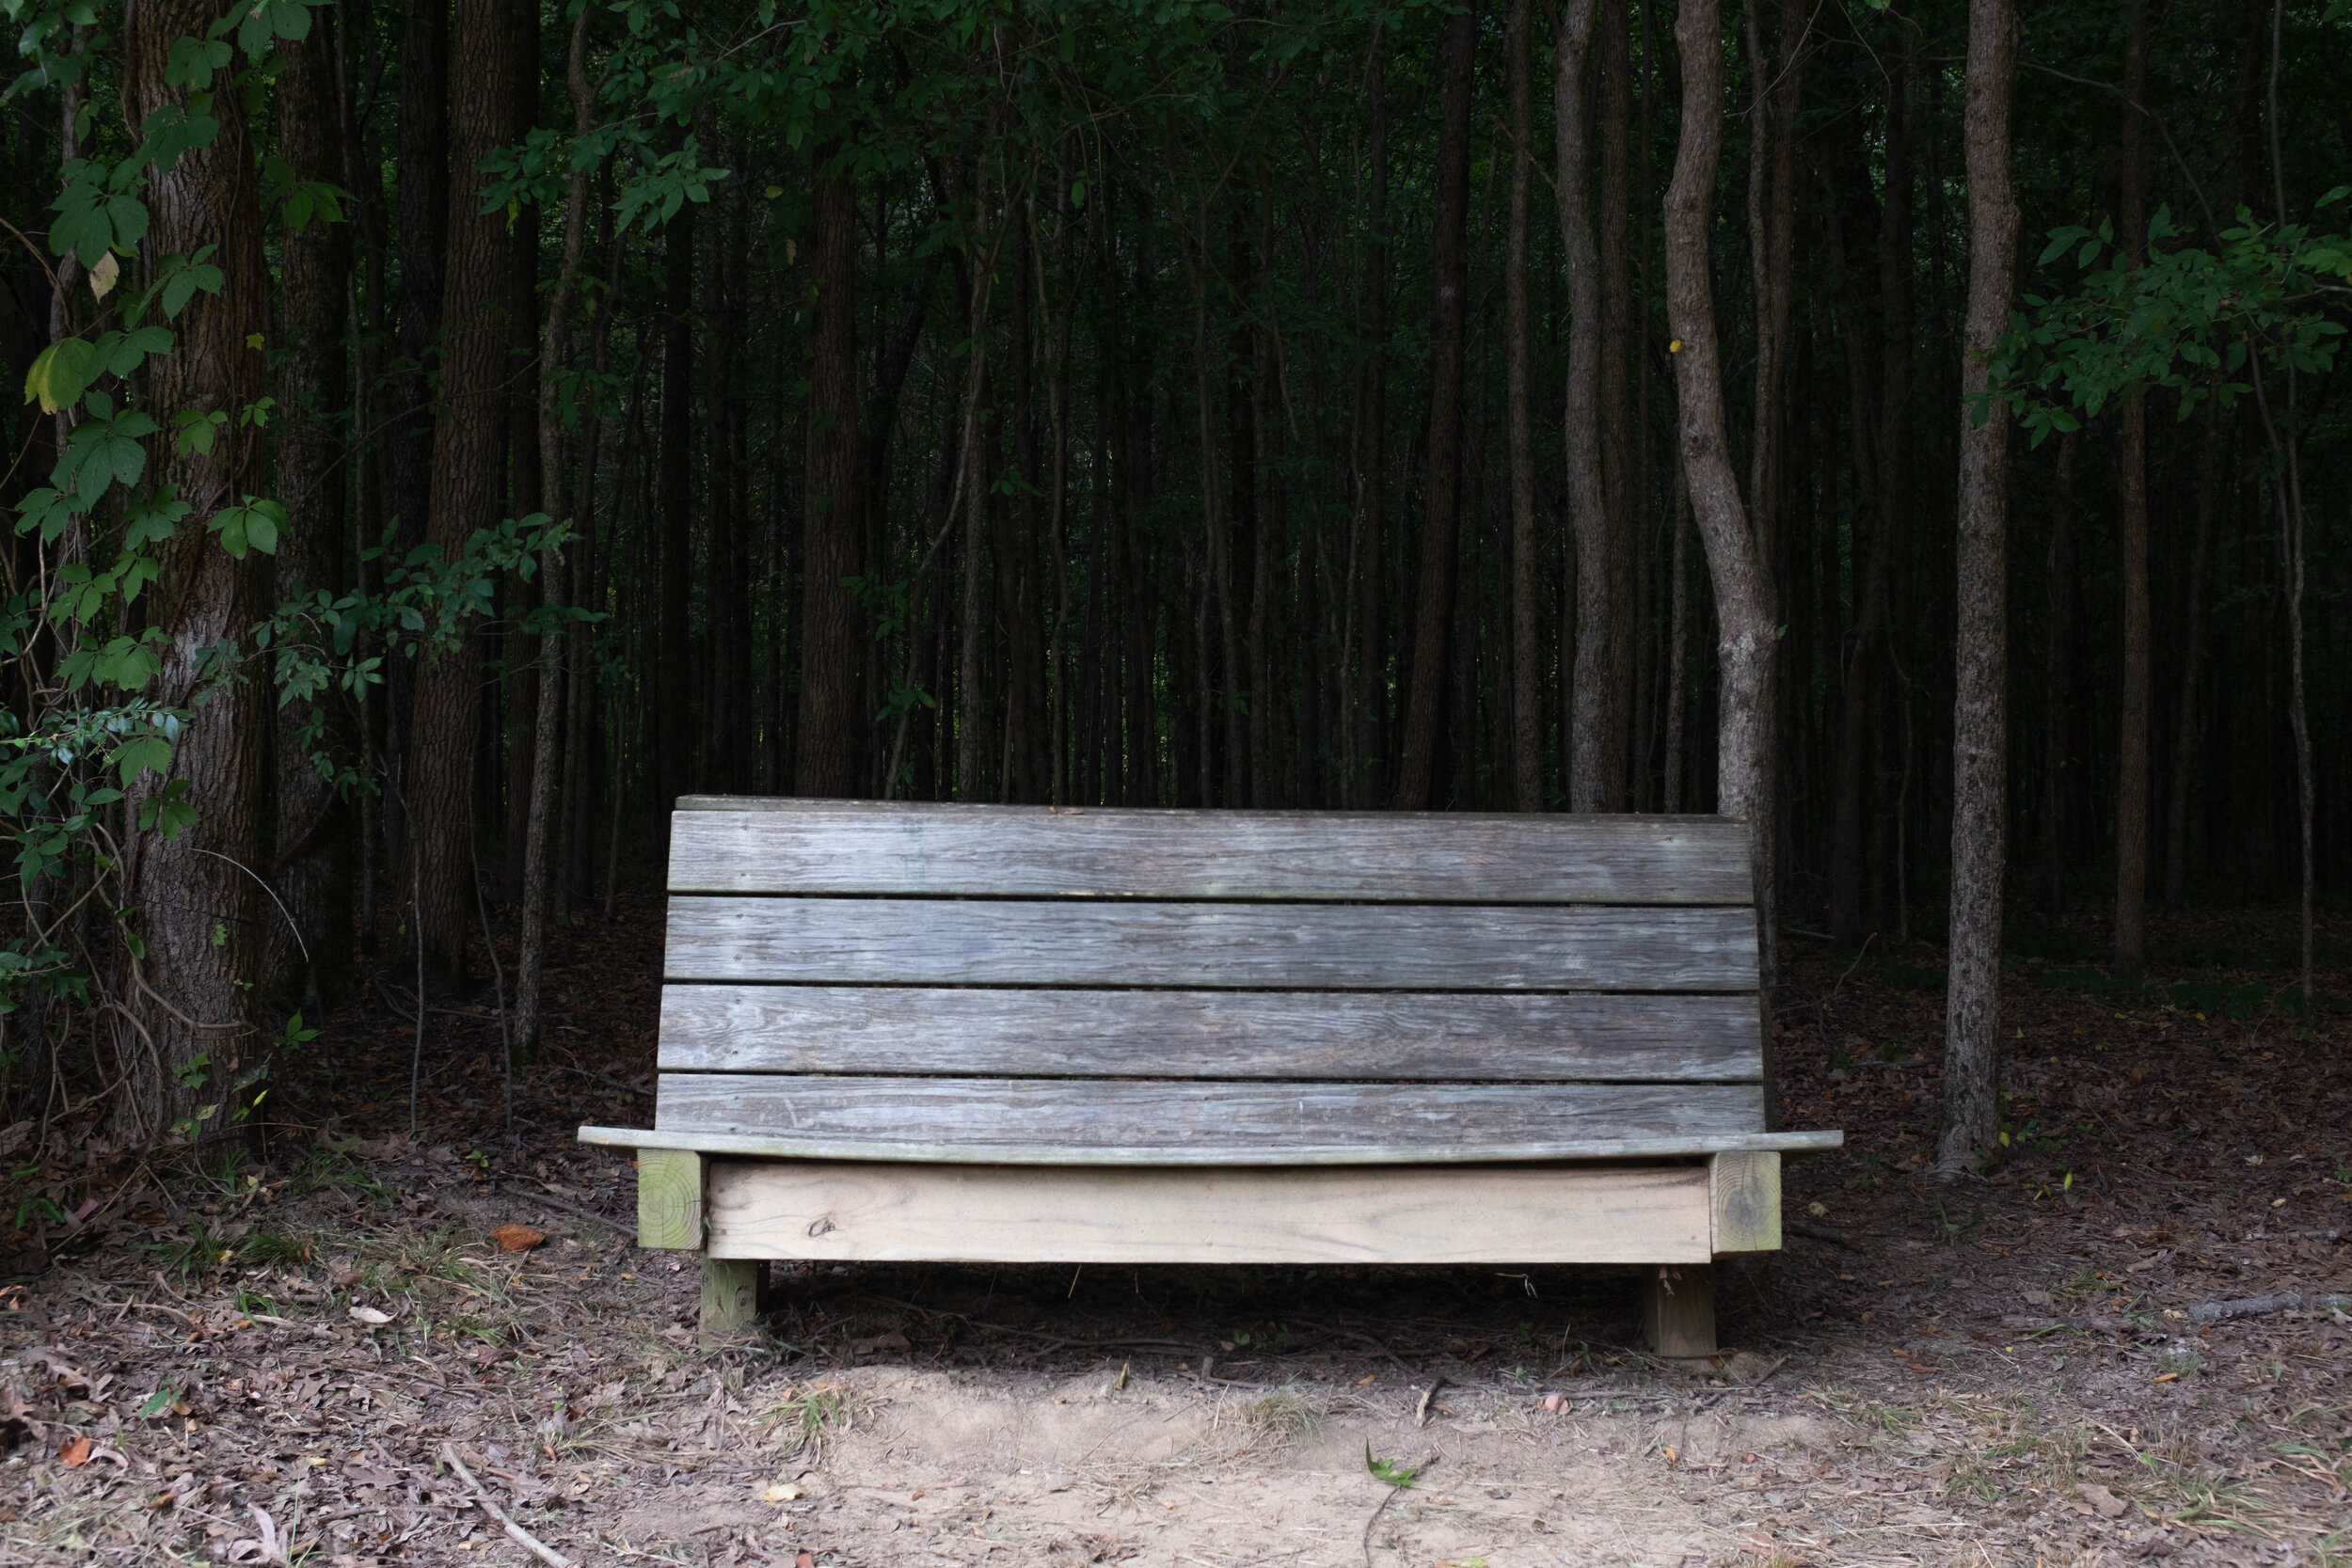 Sure, have a seat. Nothing in the deep, dark woods behind you would ever sneak up on you while you’re resting… :O